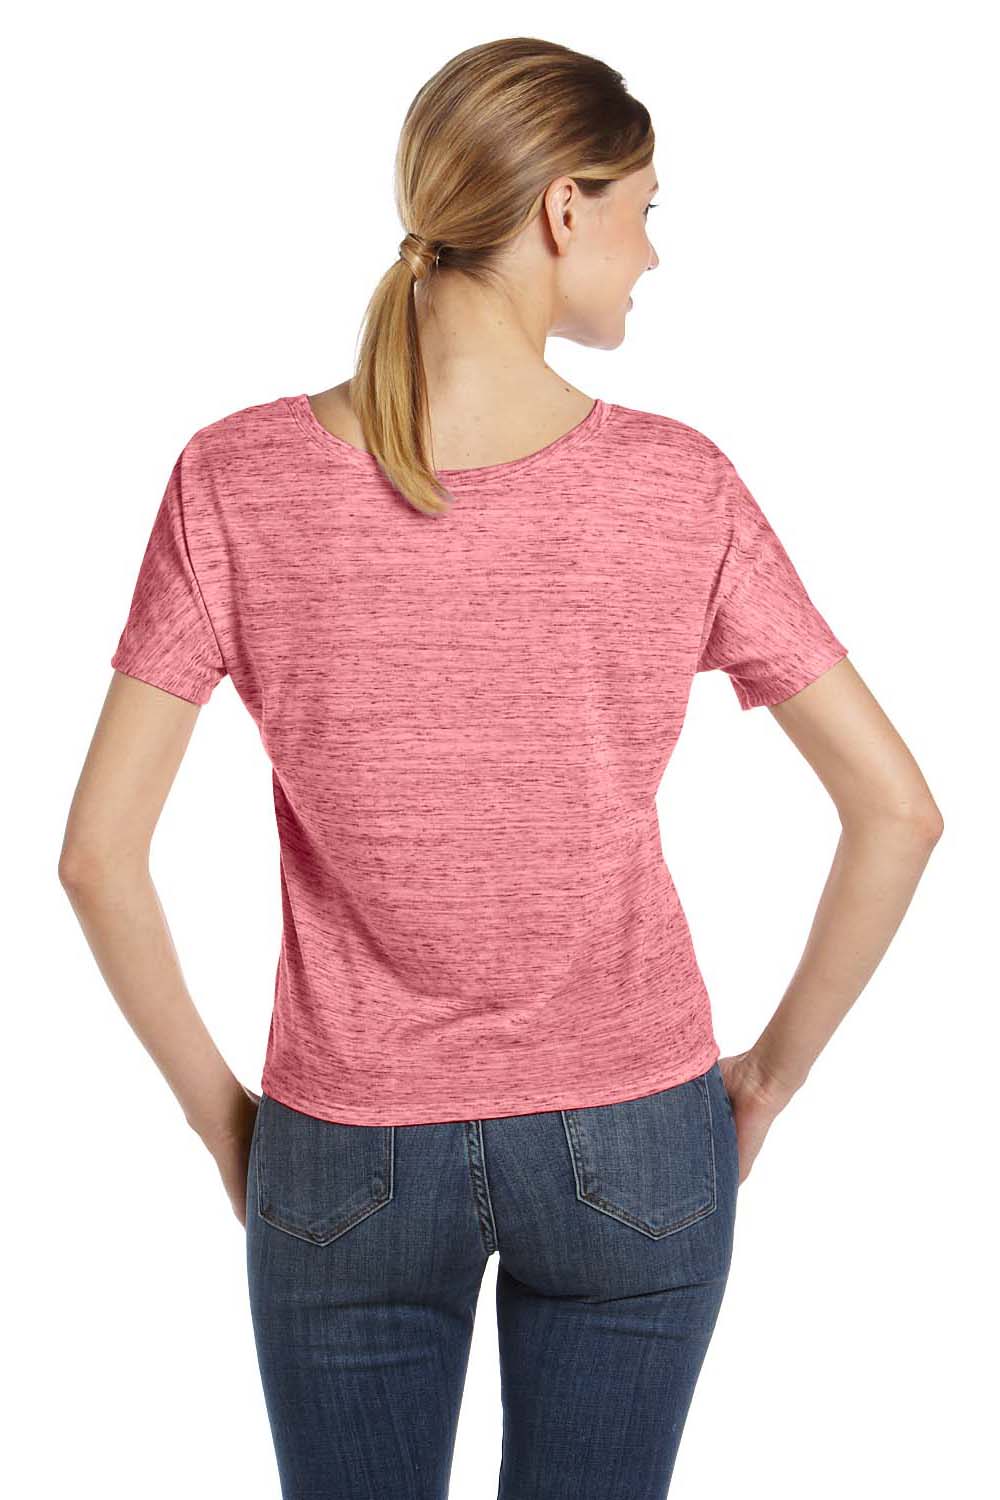 Bella + Canvas 8816 Womens Slouchy Short Sleeve Wide Neck T-Shirt Red Marble Back